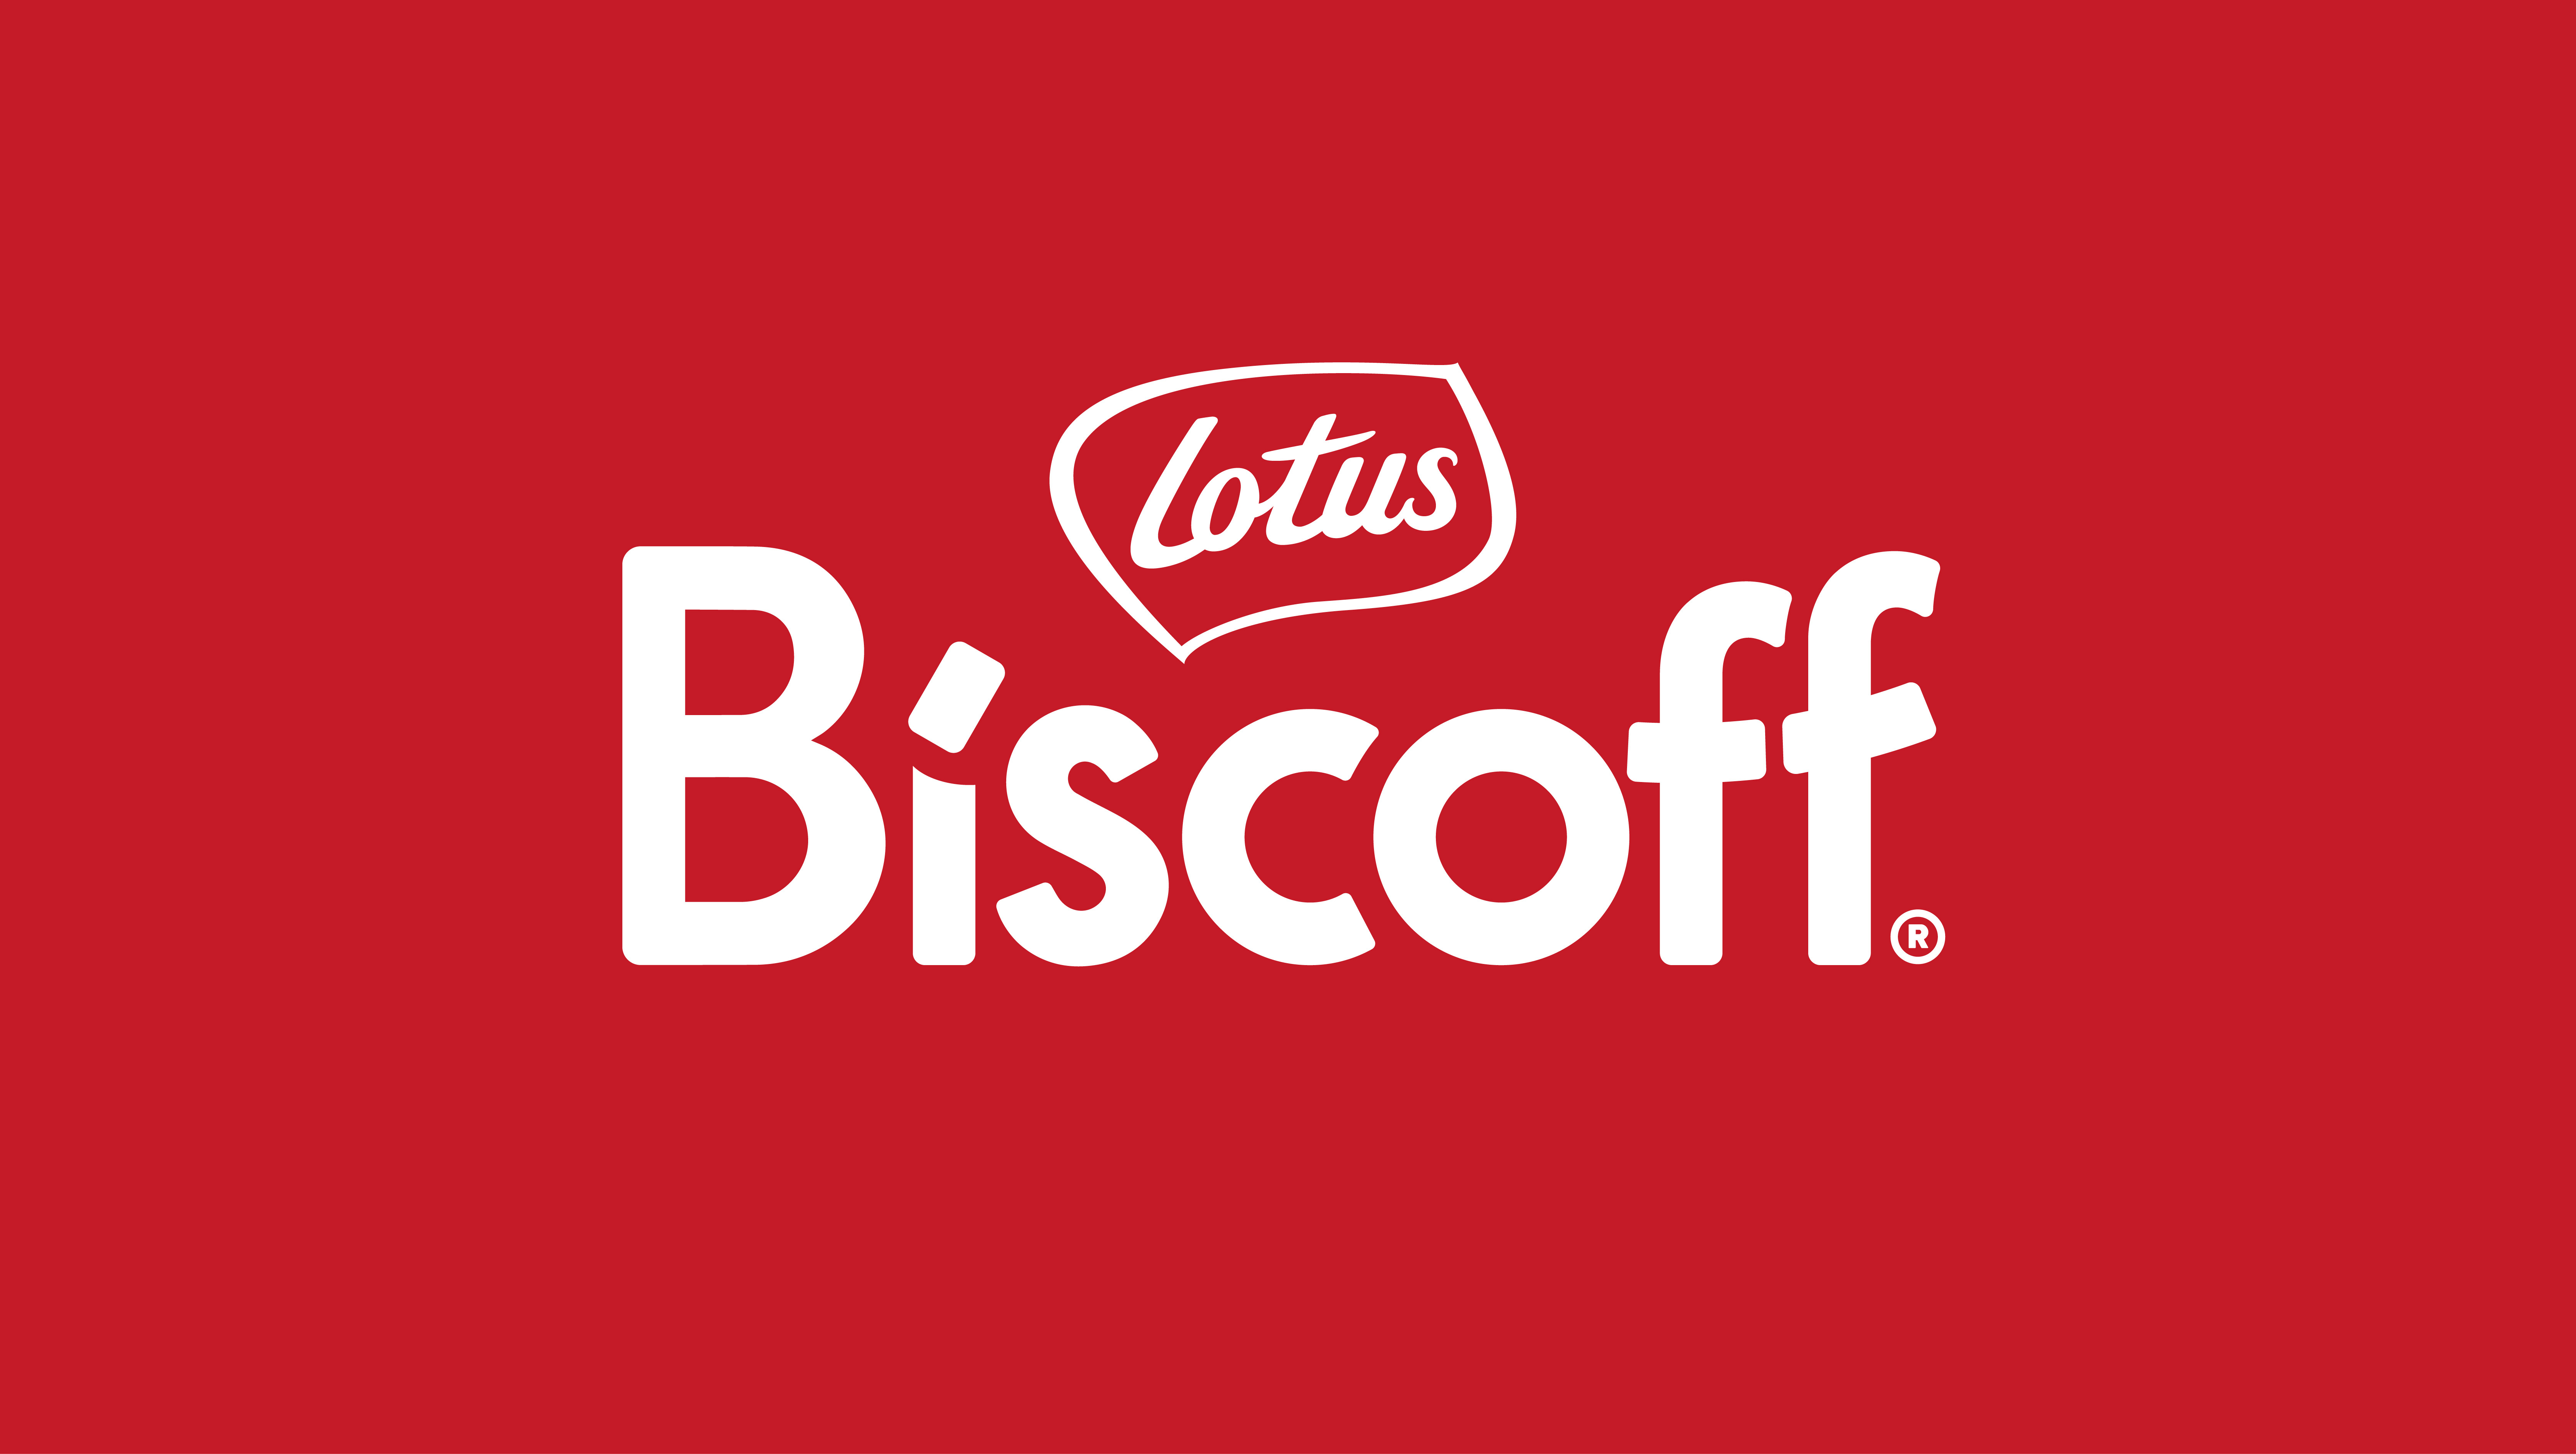 Cult Status Belgian Cookie Brand Lotus Biscoff Launches an Impactful New Global Brand Identity and Packaging Design Created by BrandMe, in a Move to Modernise and Hero Biscoff Globally